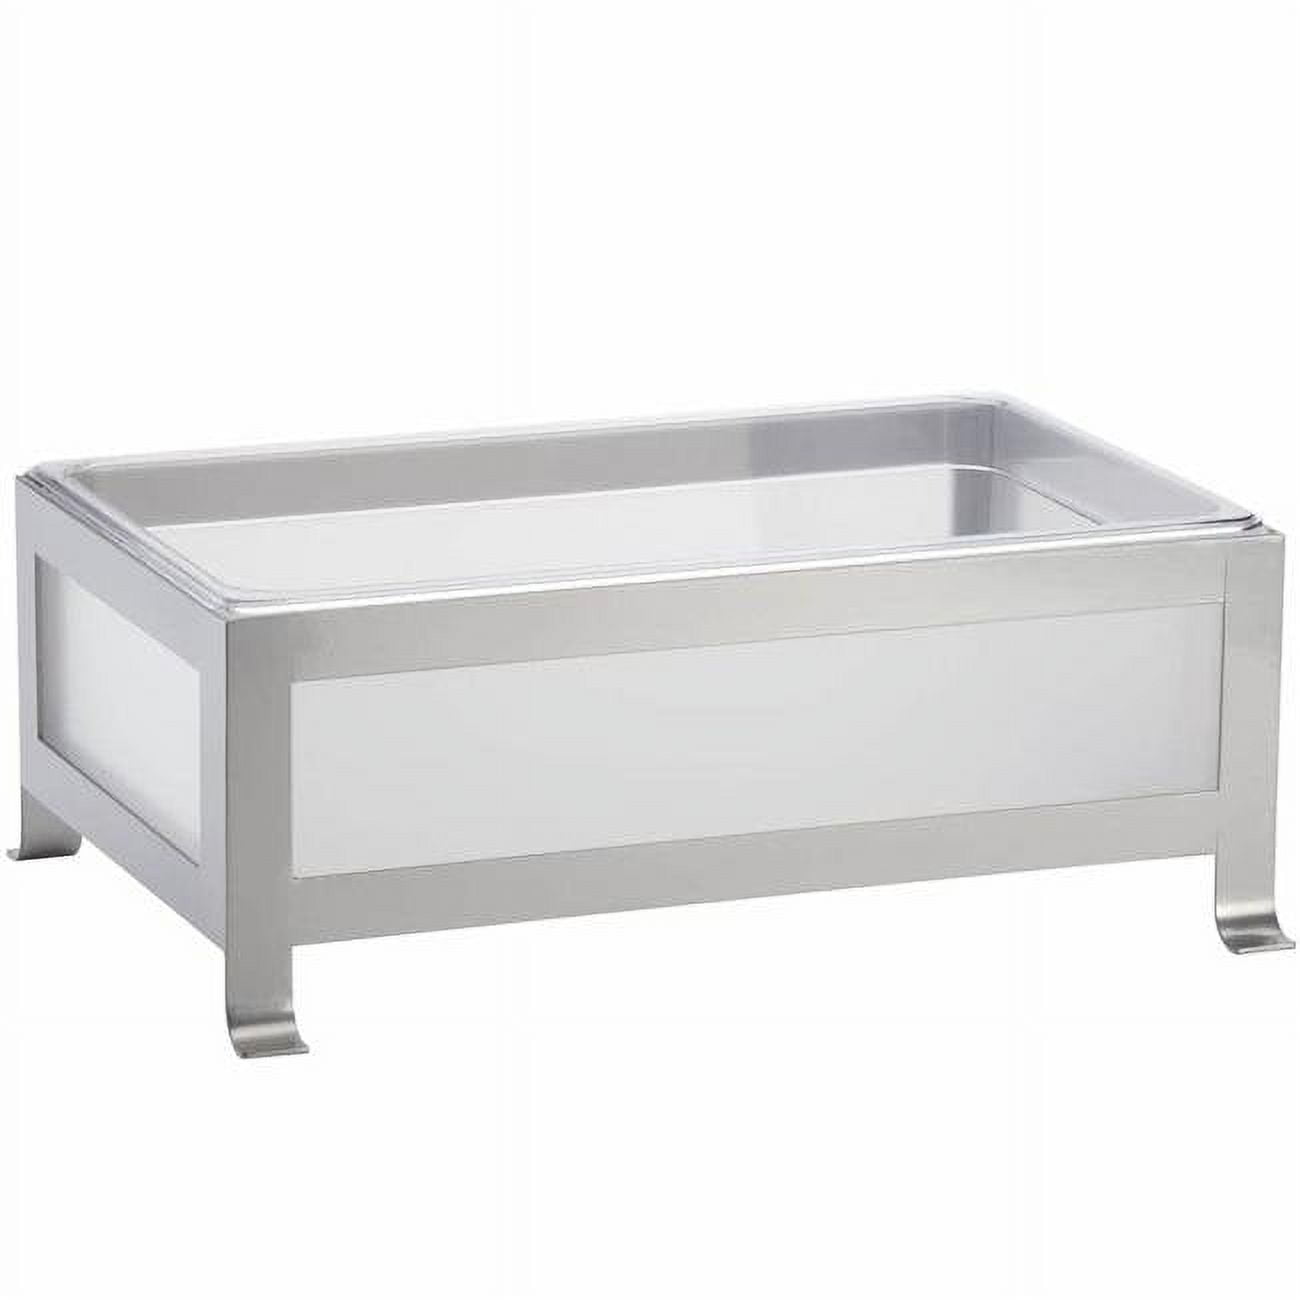 Picture of Cal Mil 1582-12-33 Soho Silver Ice Housing with Clear Pan - 21 x 12 x 8.25 in.